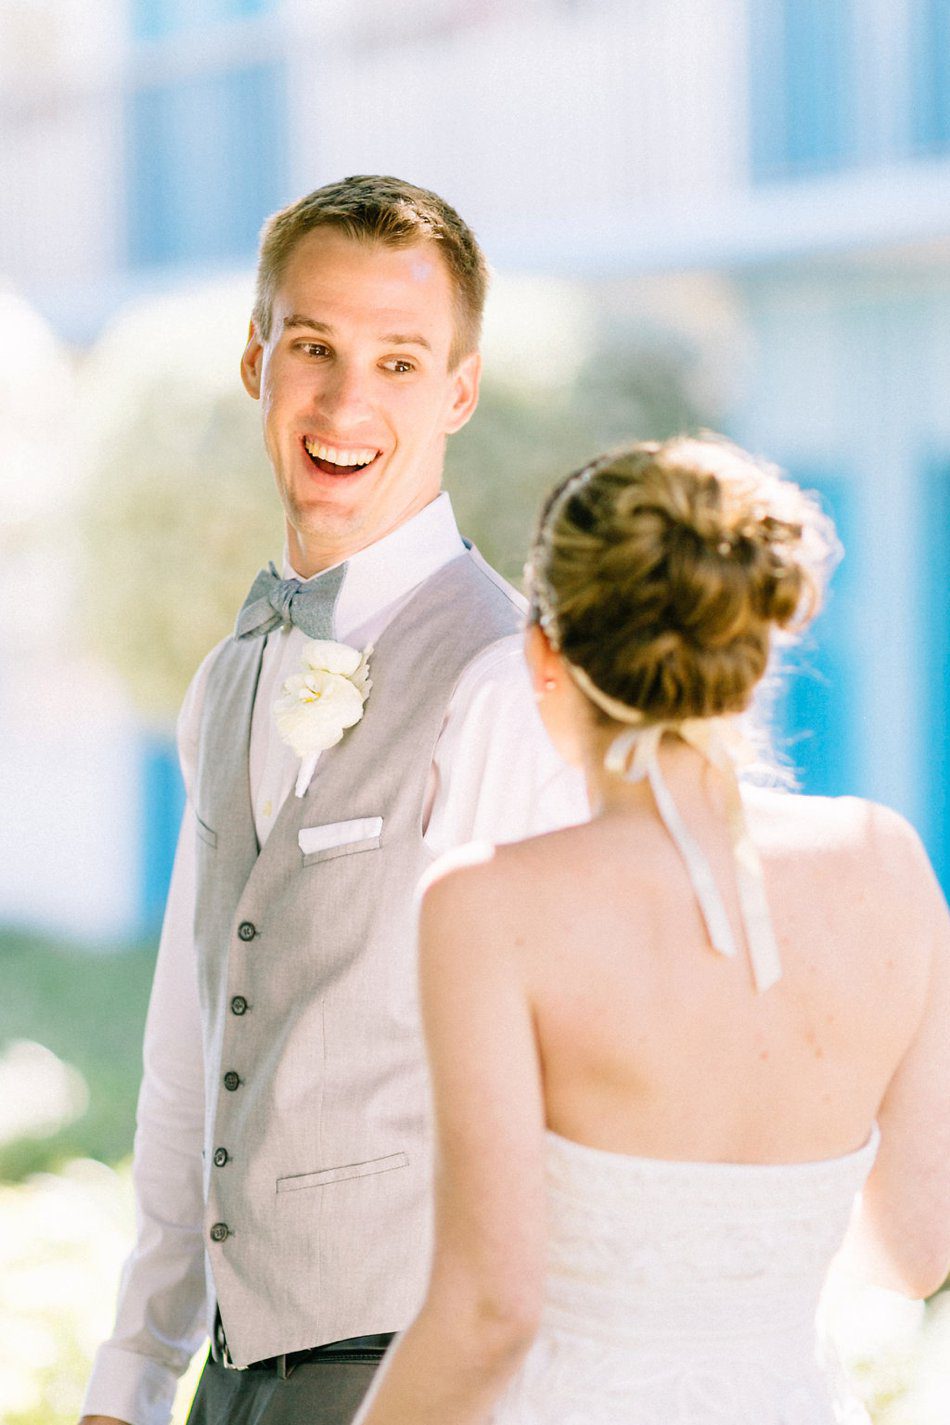 Priceless grooms reaction to seeing the bride during the first look. Destination wedding at the Postcard Inn on the Beach by Catherine Ann Photography